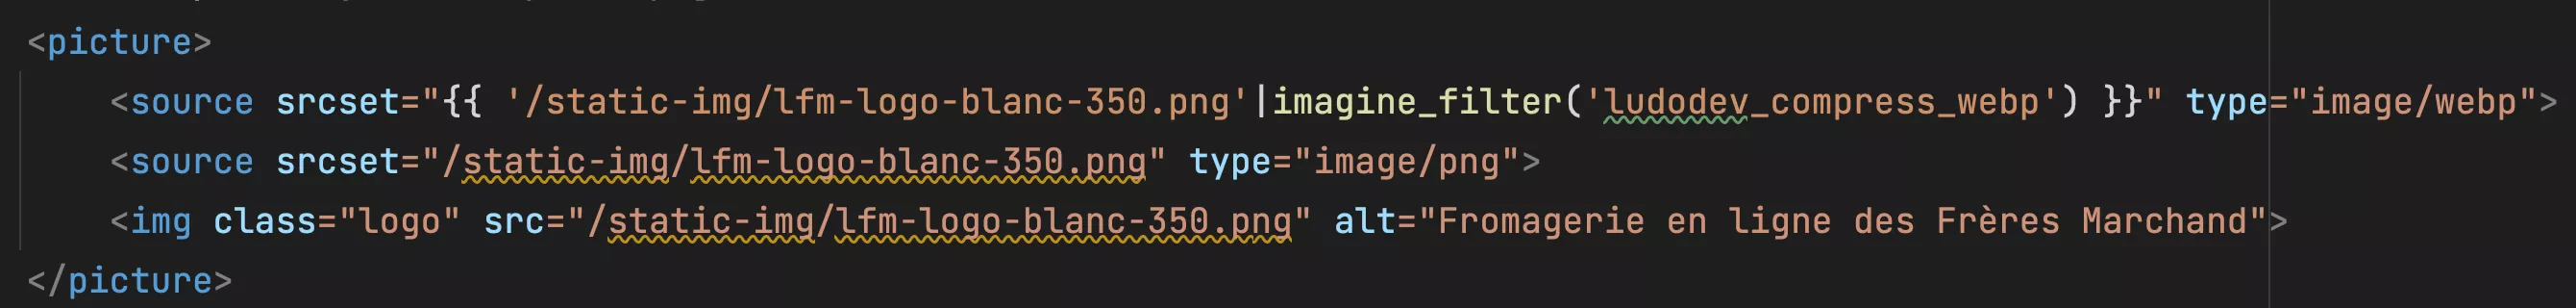 Tag HTML5 picture